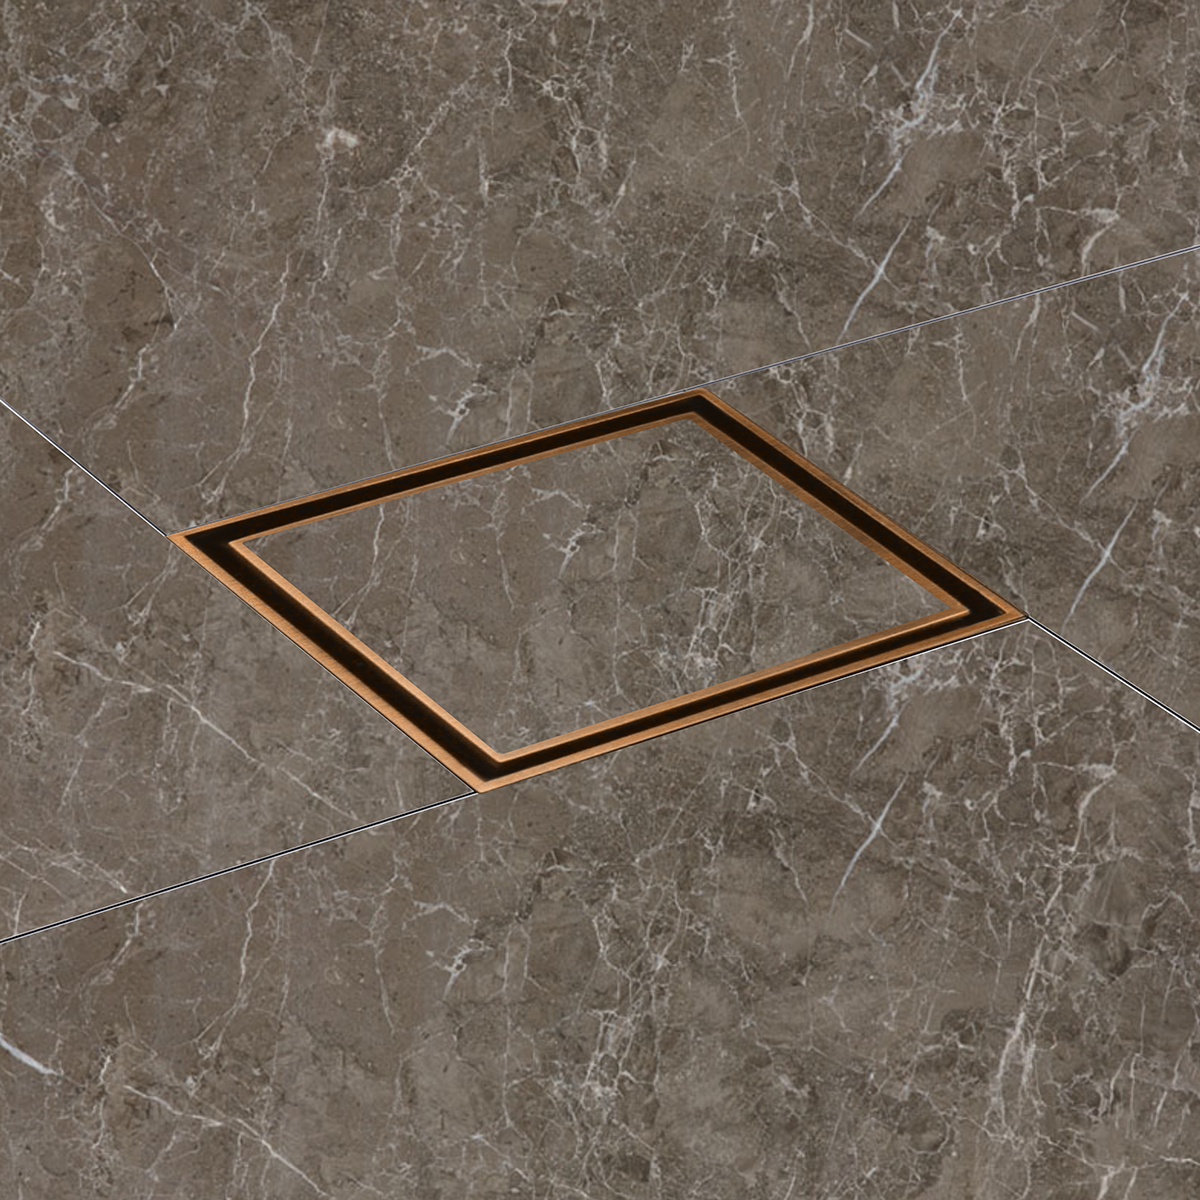 Marble Insert Shower Drain Channel (12 x 12 Inches) ROSE GOLD/ ANTIQUE COPPER installed